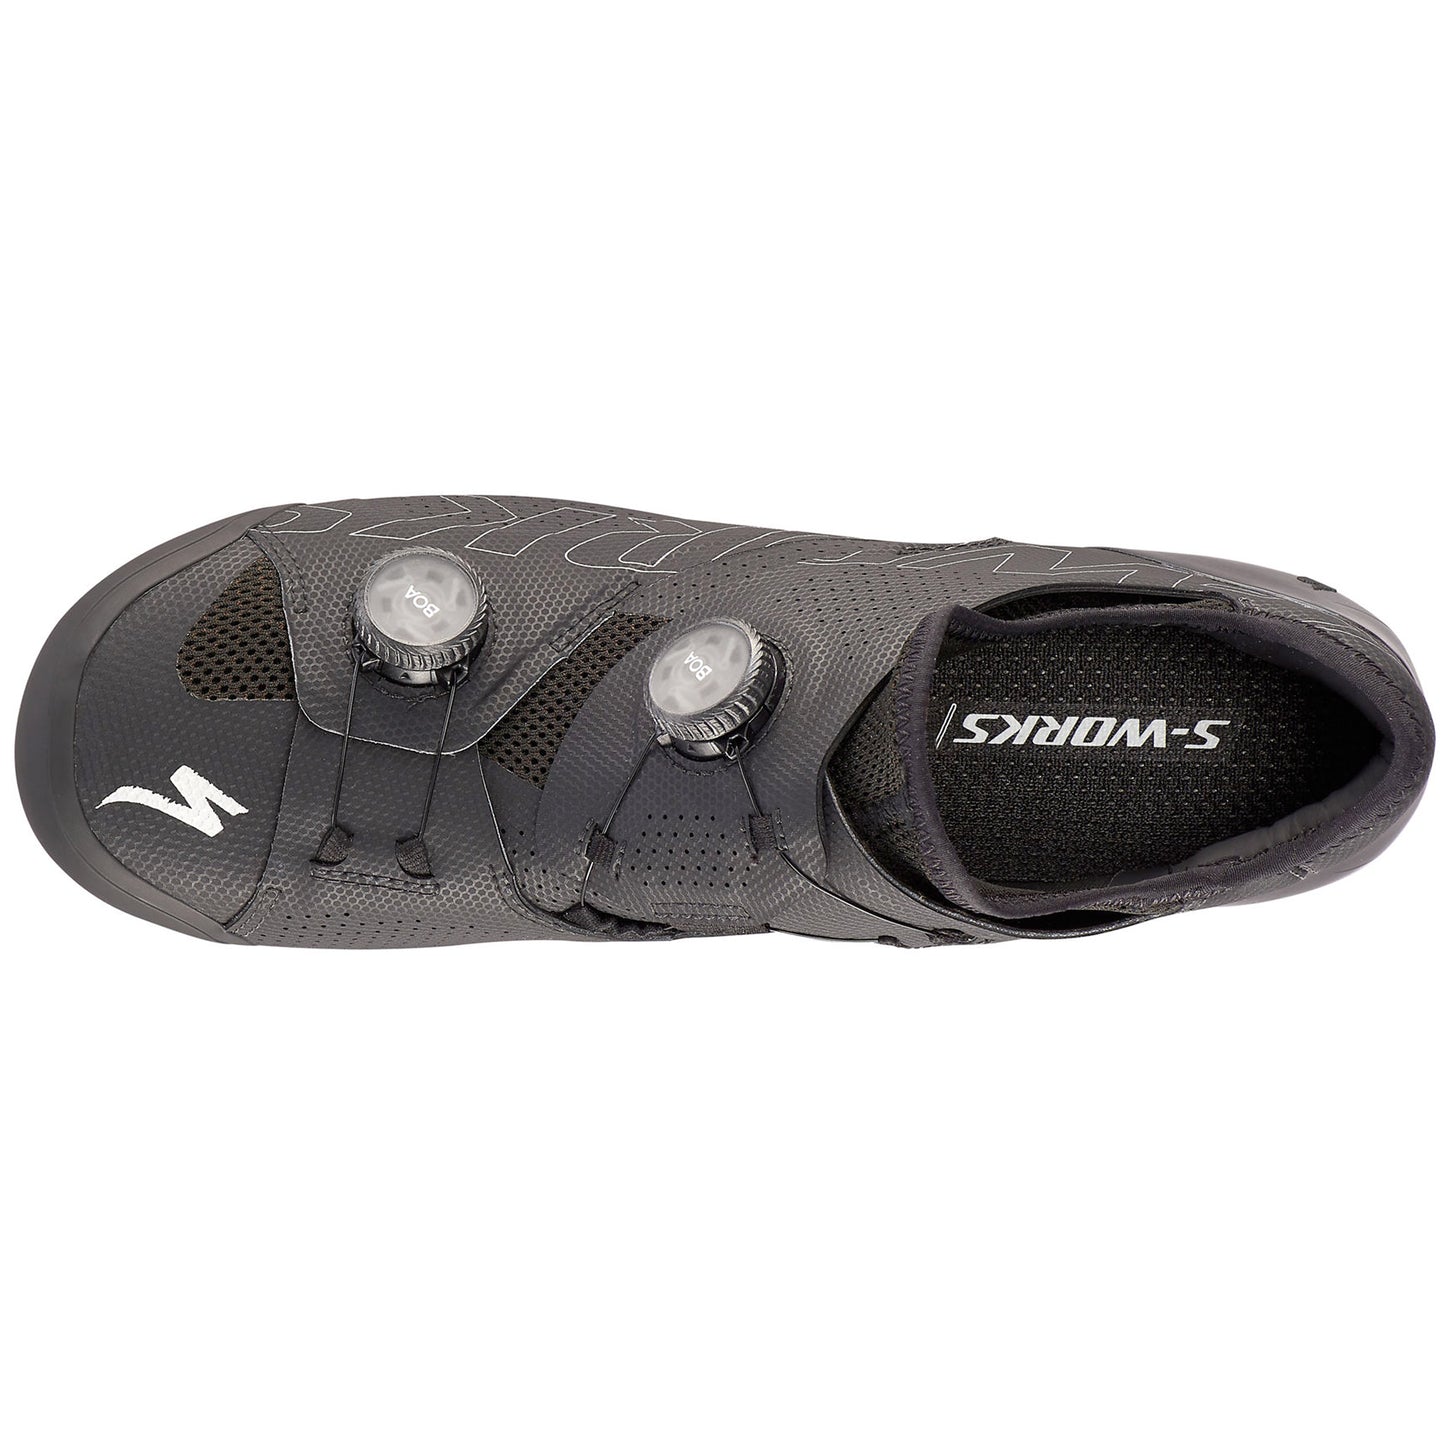 Specialized S-Works Ares Unisex Road Cycling Shoes, Black